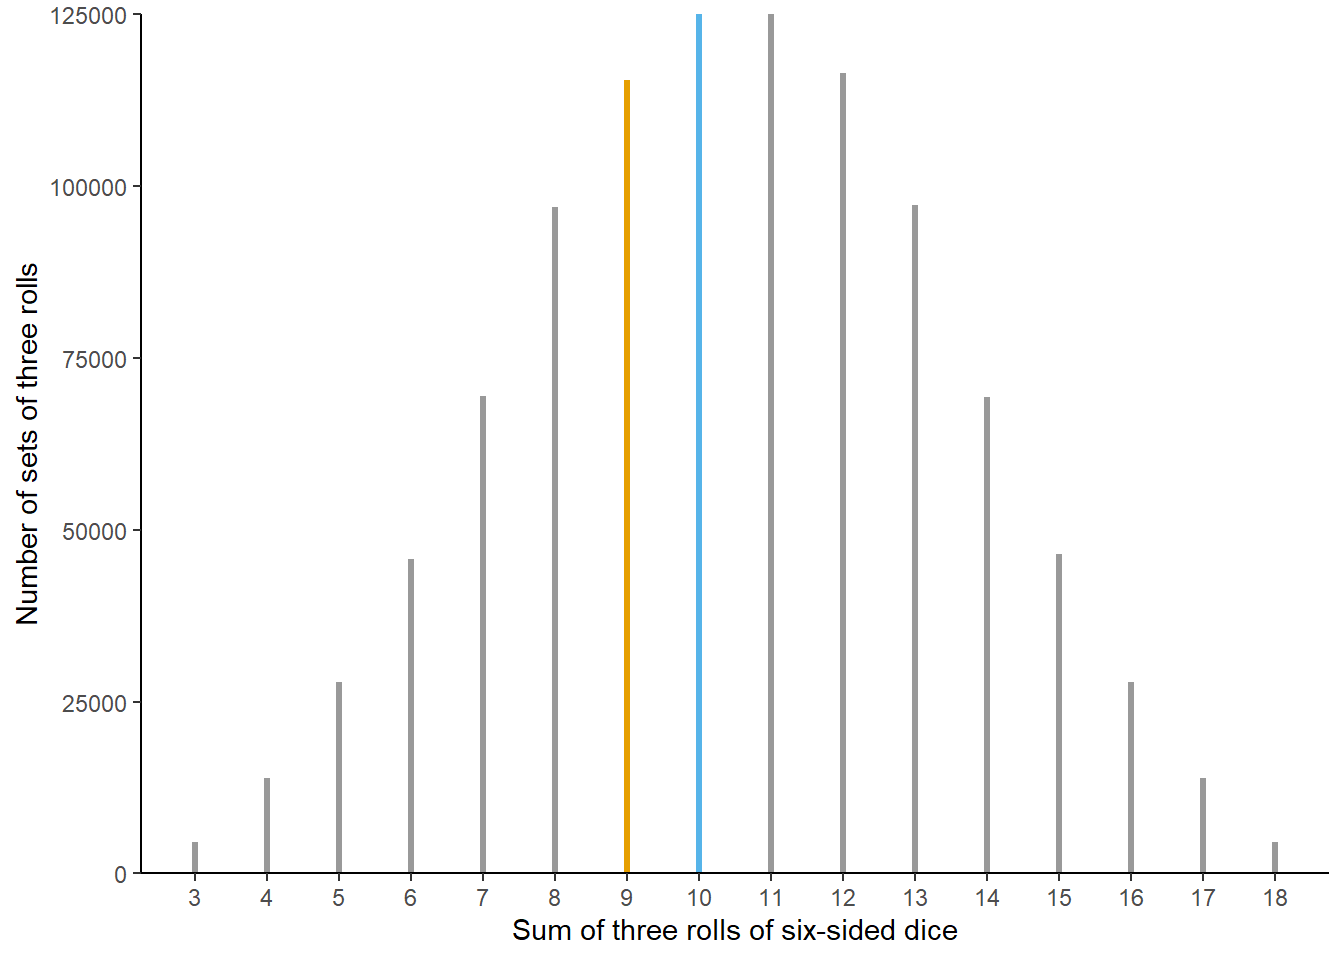 Results of 1 million sets of three rolls of fair six-sided dice. Sets in which the sum of the dice is 9 (10) are represented by orange (blue) spike.